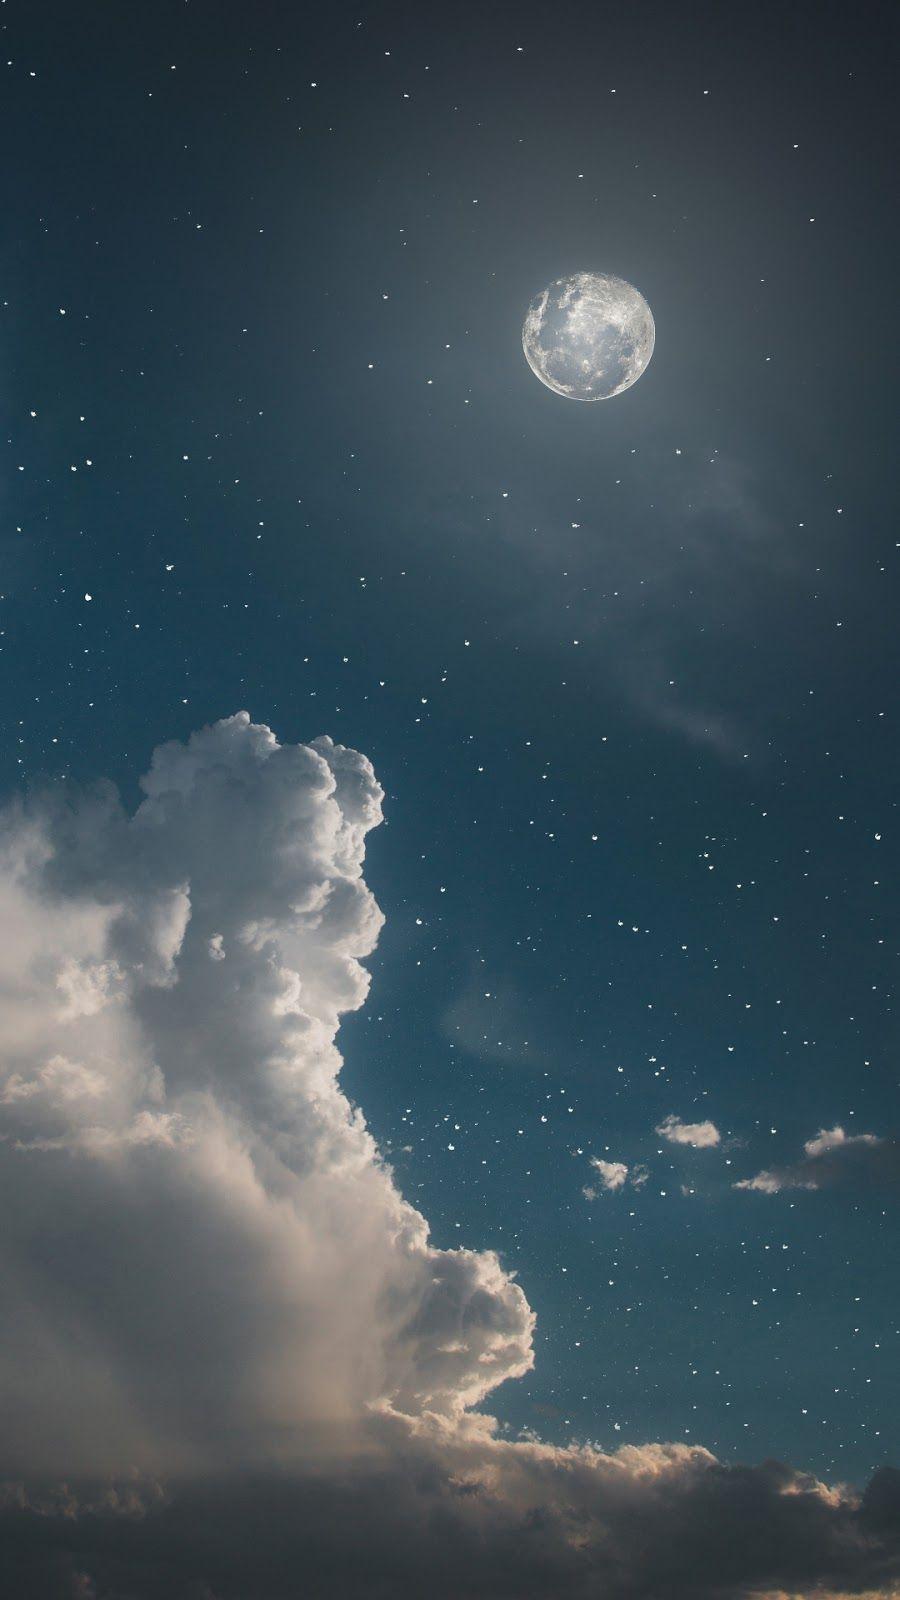 A moon is in the sky with clouds - Night, sky, stars